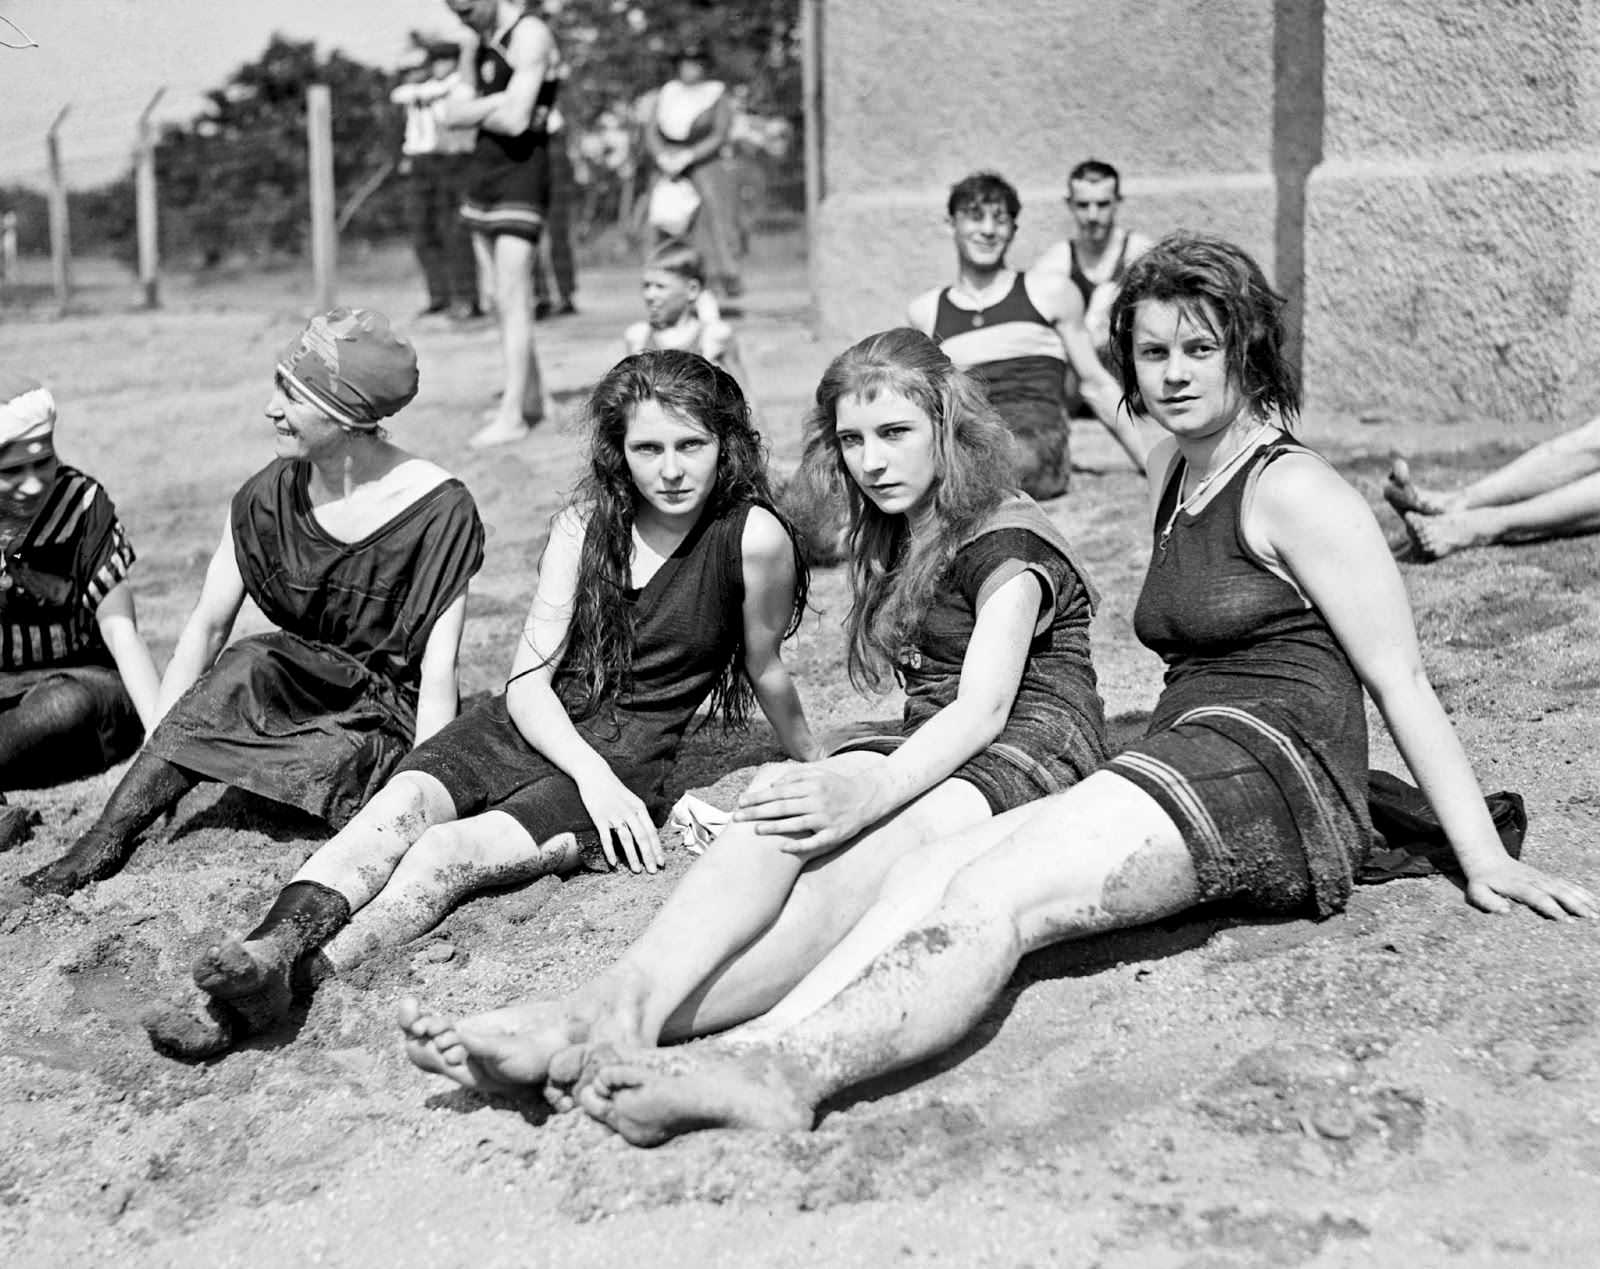 People wearing what was at the time normal swimwear while at the beach in New Jersey, US, in the 1920s.